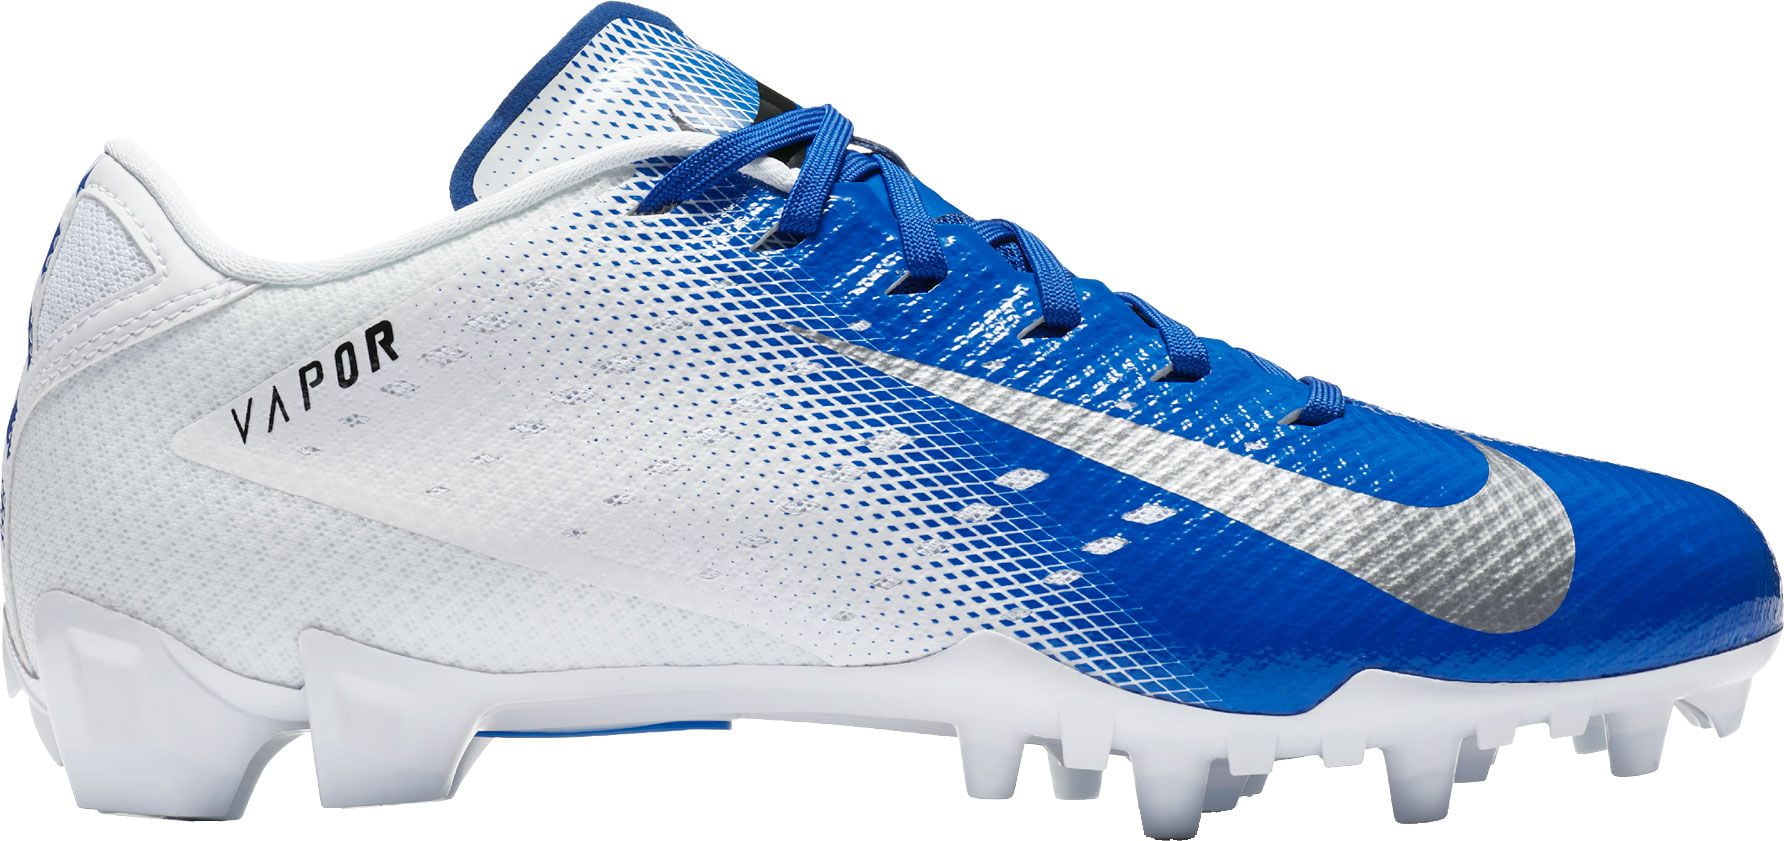 nike cleats blue and white